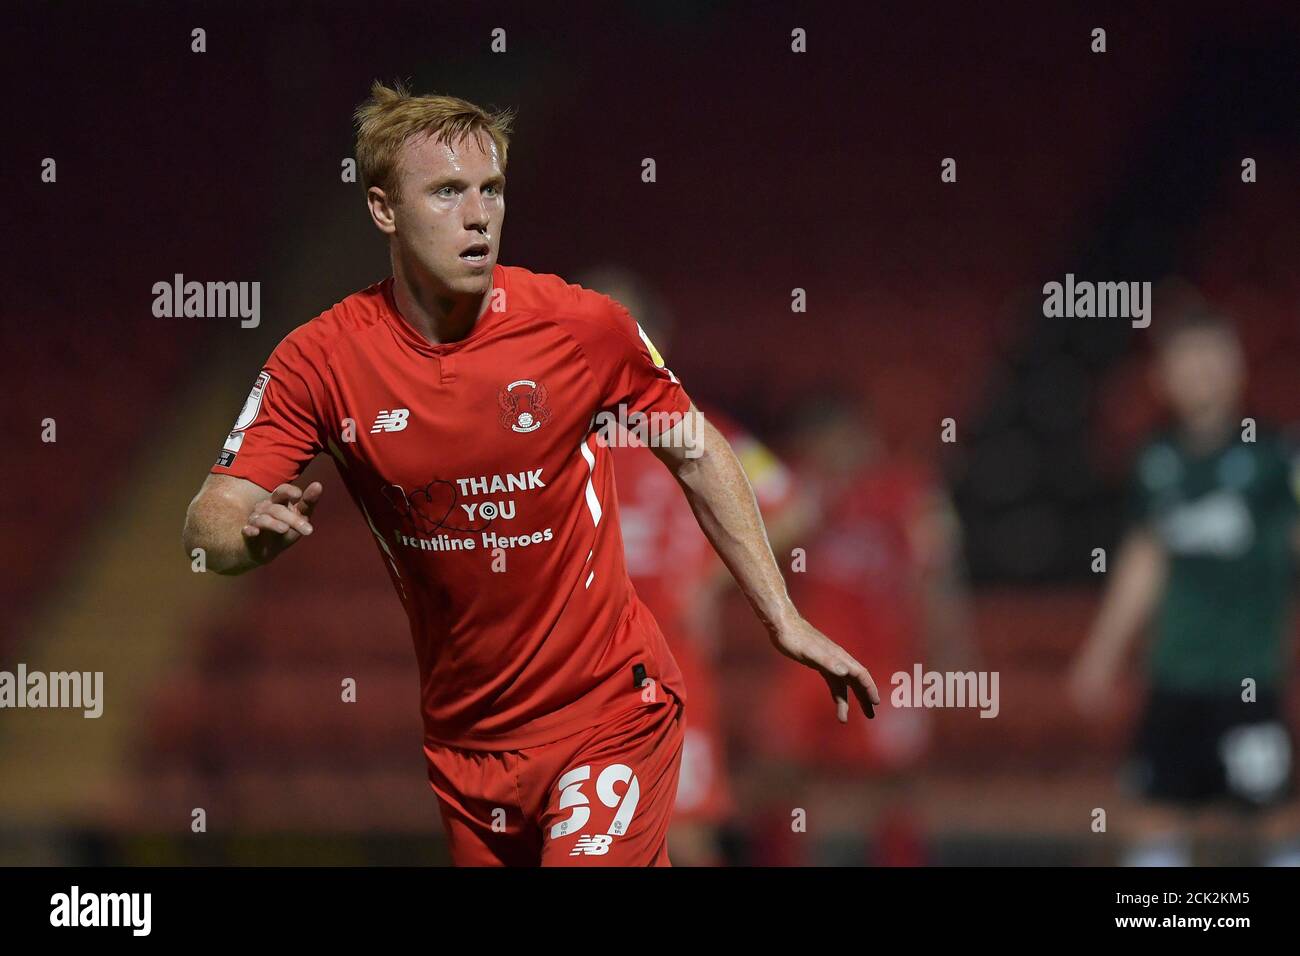 London, UK. 15th Sep, 2020. Danny Johnson of Leyton Orient during the Carabao Cup second round match between Leyton Orient and Plymouth Argyle at the Matchroom Stadium, London, England on 15 September 2020. Photo by Vince Mignott/PRiME Media Images. Credit: PRiME Media Images/Alamy Live News Stock Photo